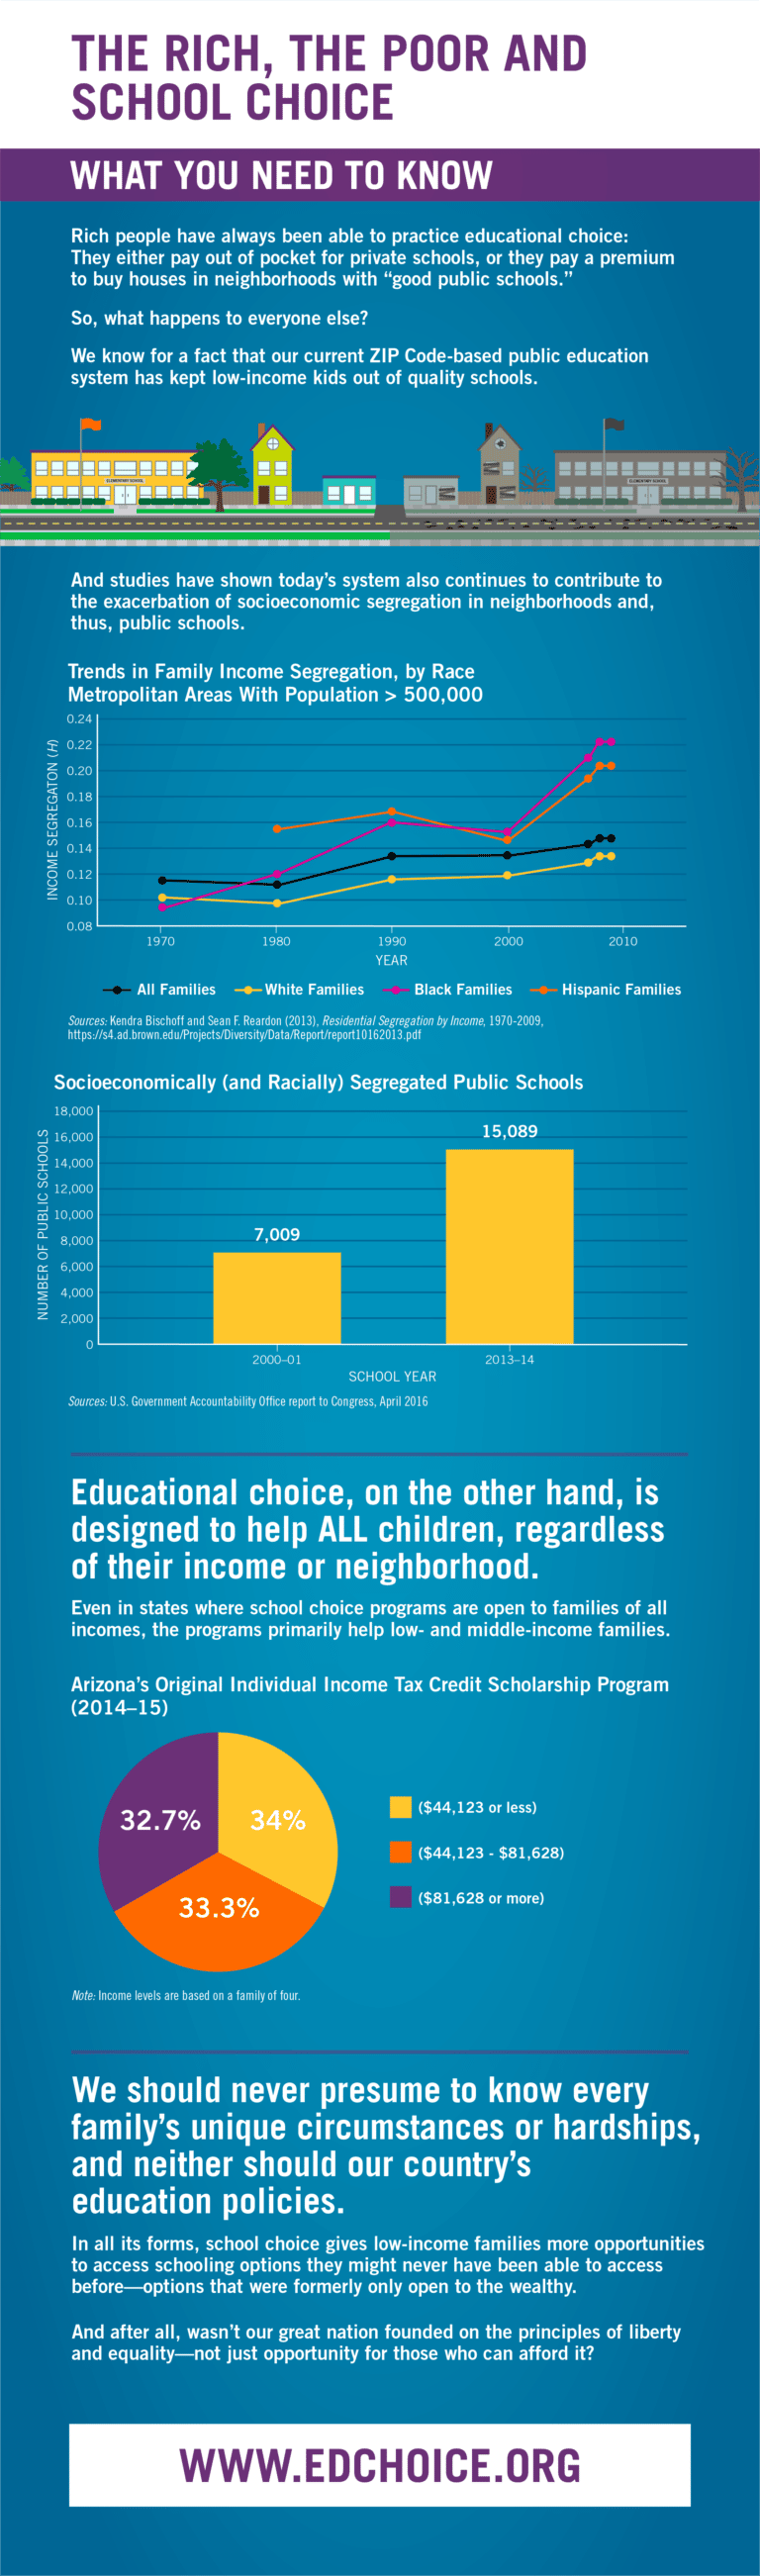 The Rich, The Poor, And School Choice